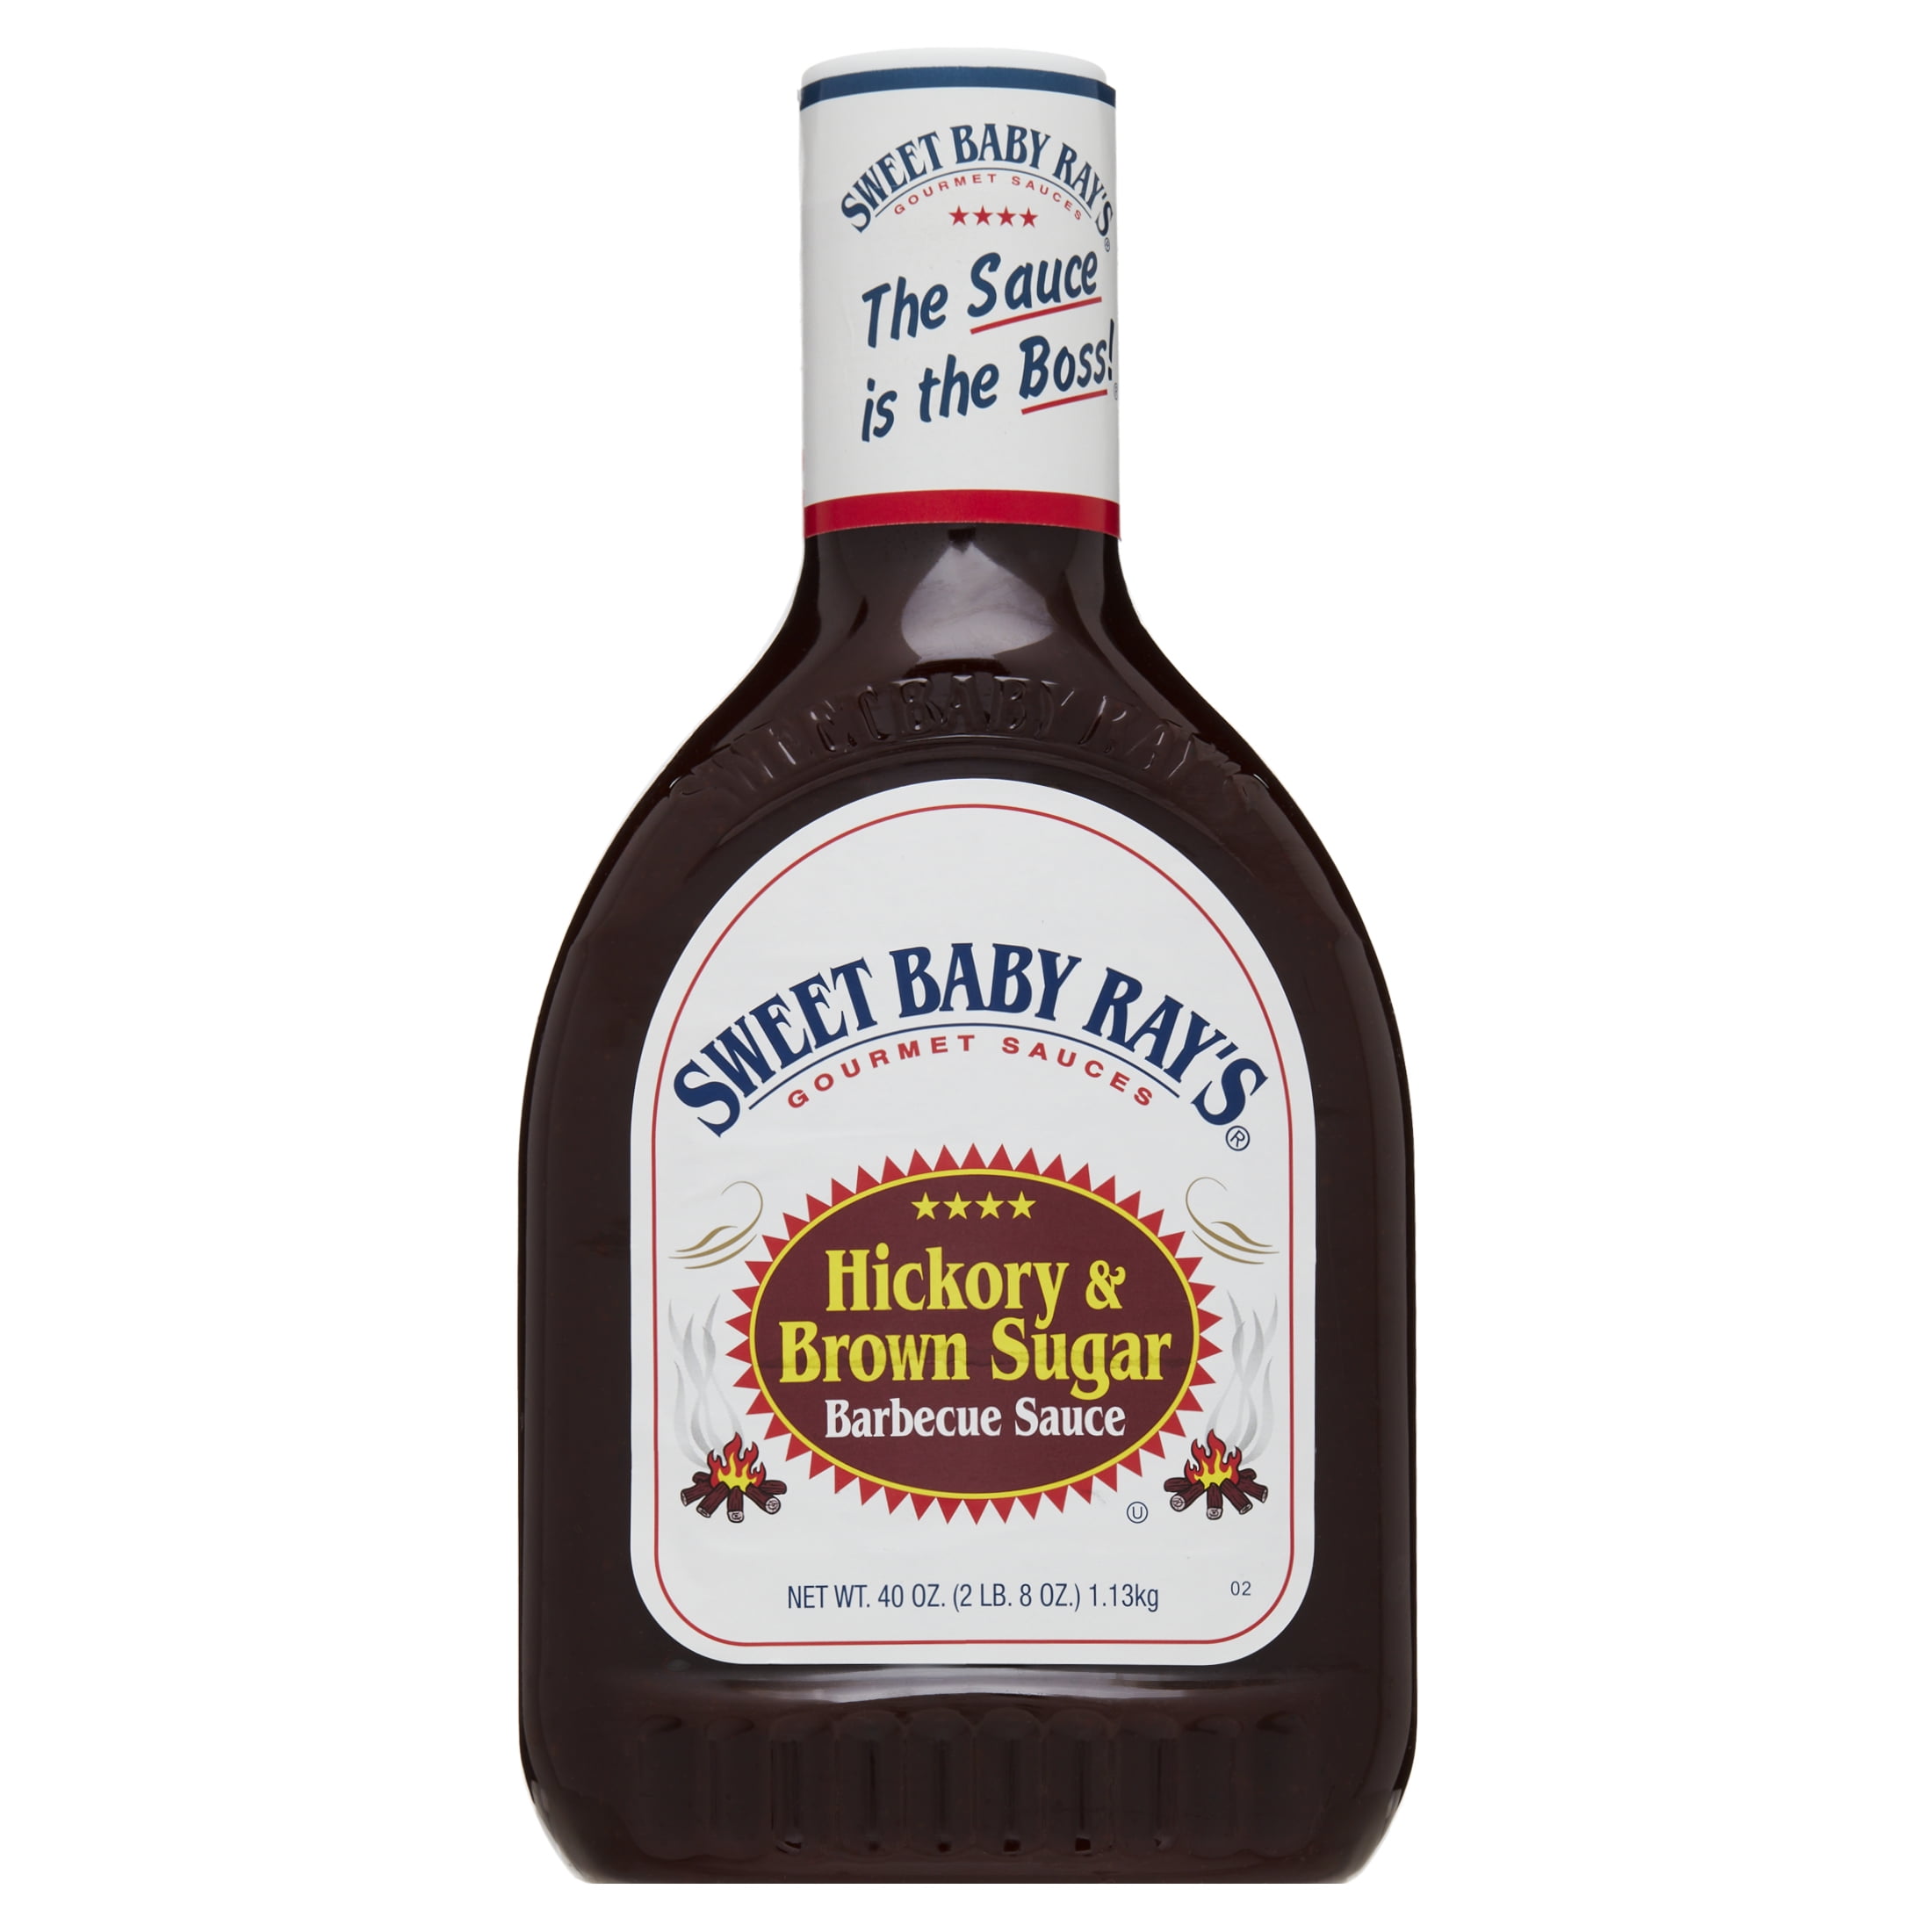 Sweet Baby Ray's Hickory & Brown Sugar Barbecue Sauce, 40 oz.